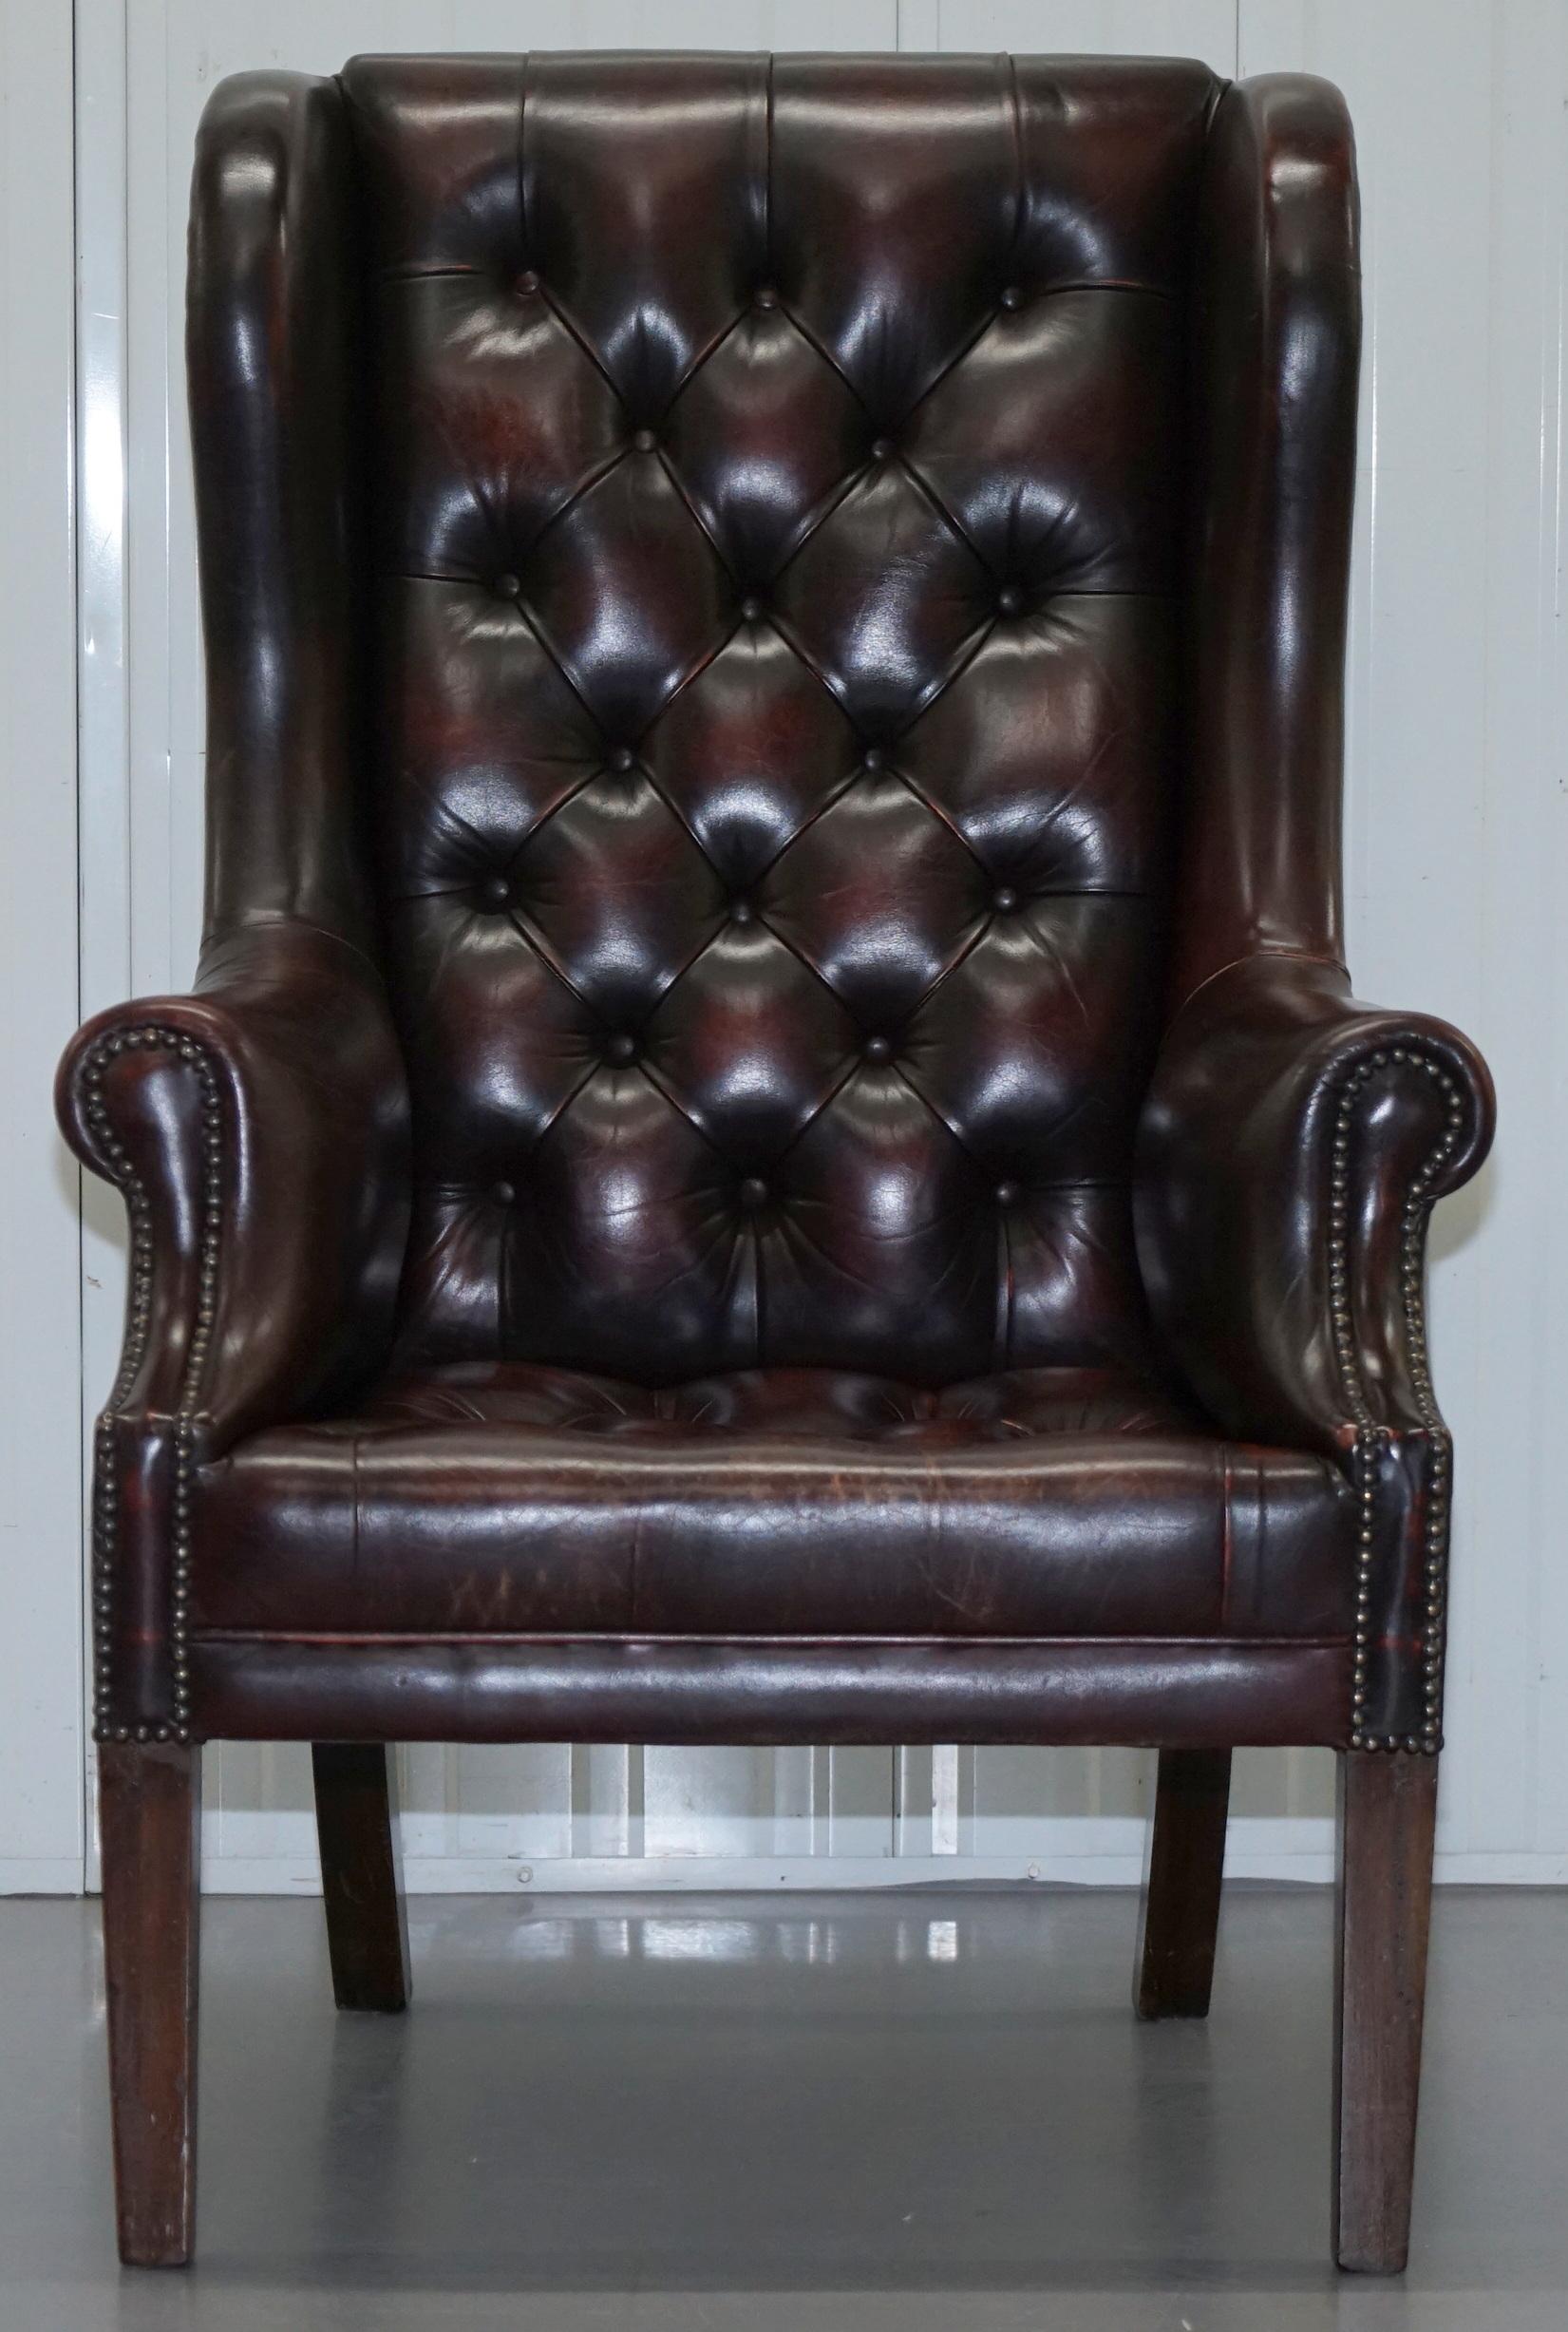 We are delighted to offer for sale this lovely Vintage aged Oxblood leather wingback armchair 

A very good looking decorative and comfortable armchair, the leather is soft and subtle, the timber hand stained and French polished

This chair has